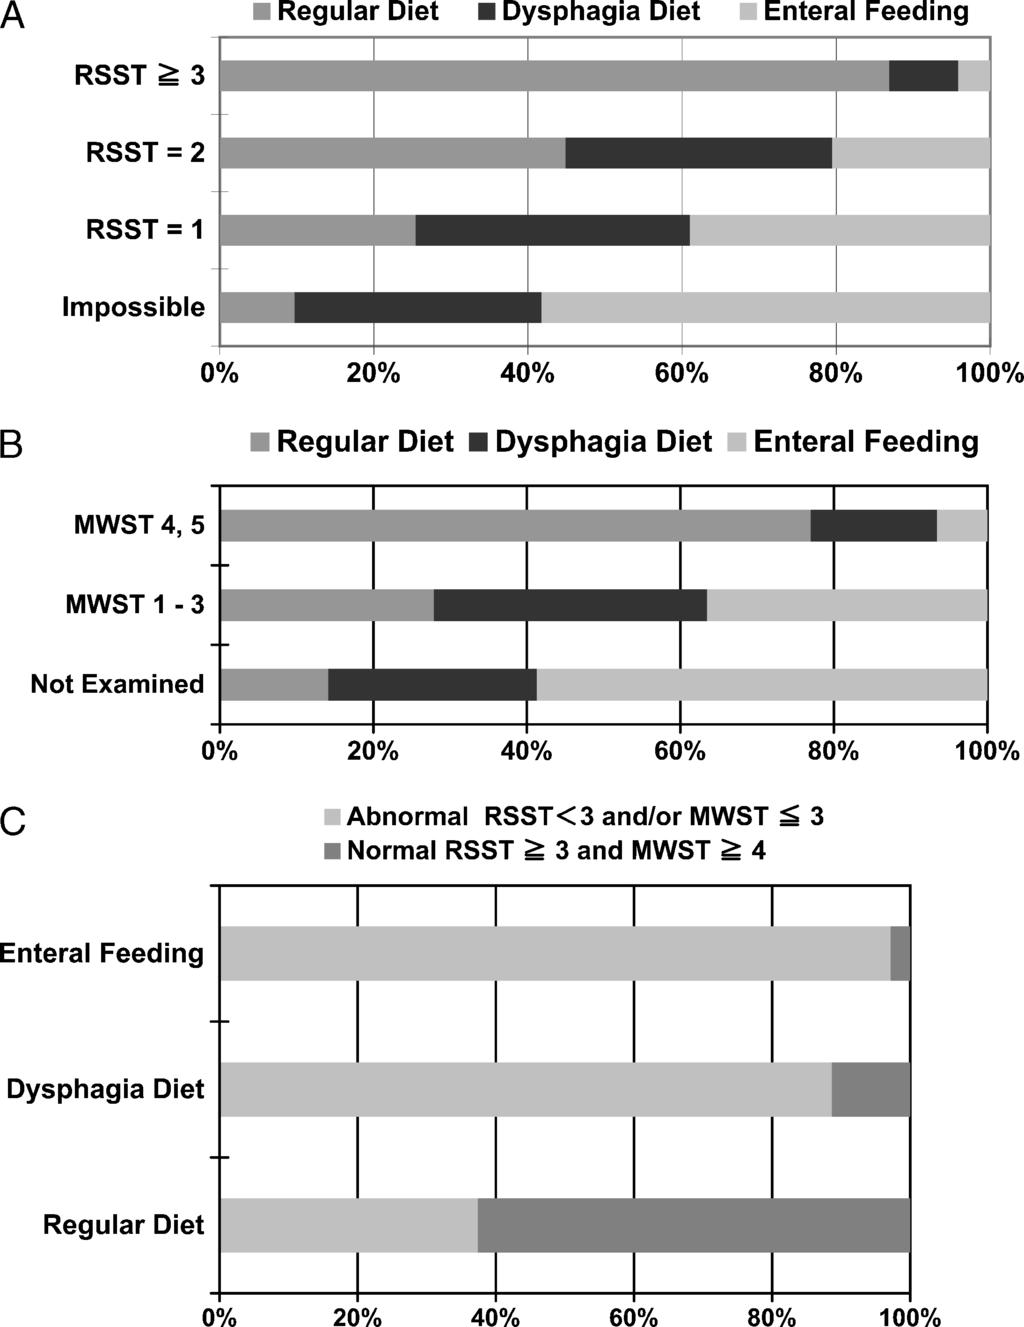 FIGURE 2 Relationship between bedside assessments on admission and the type of diet on discharge. RSST indicates repetitive saliva swallowing test; MWST, modified water swallowing test.